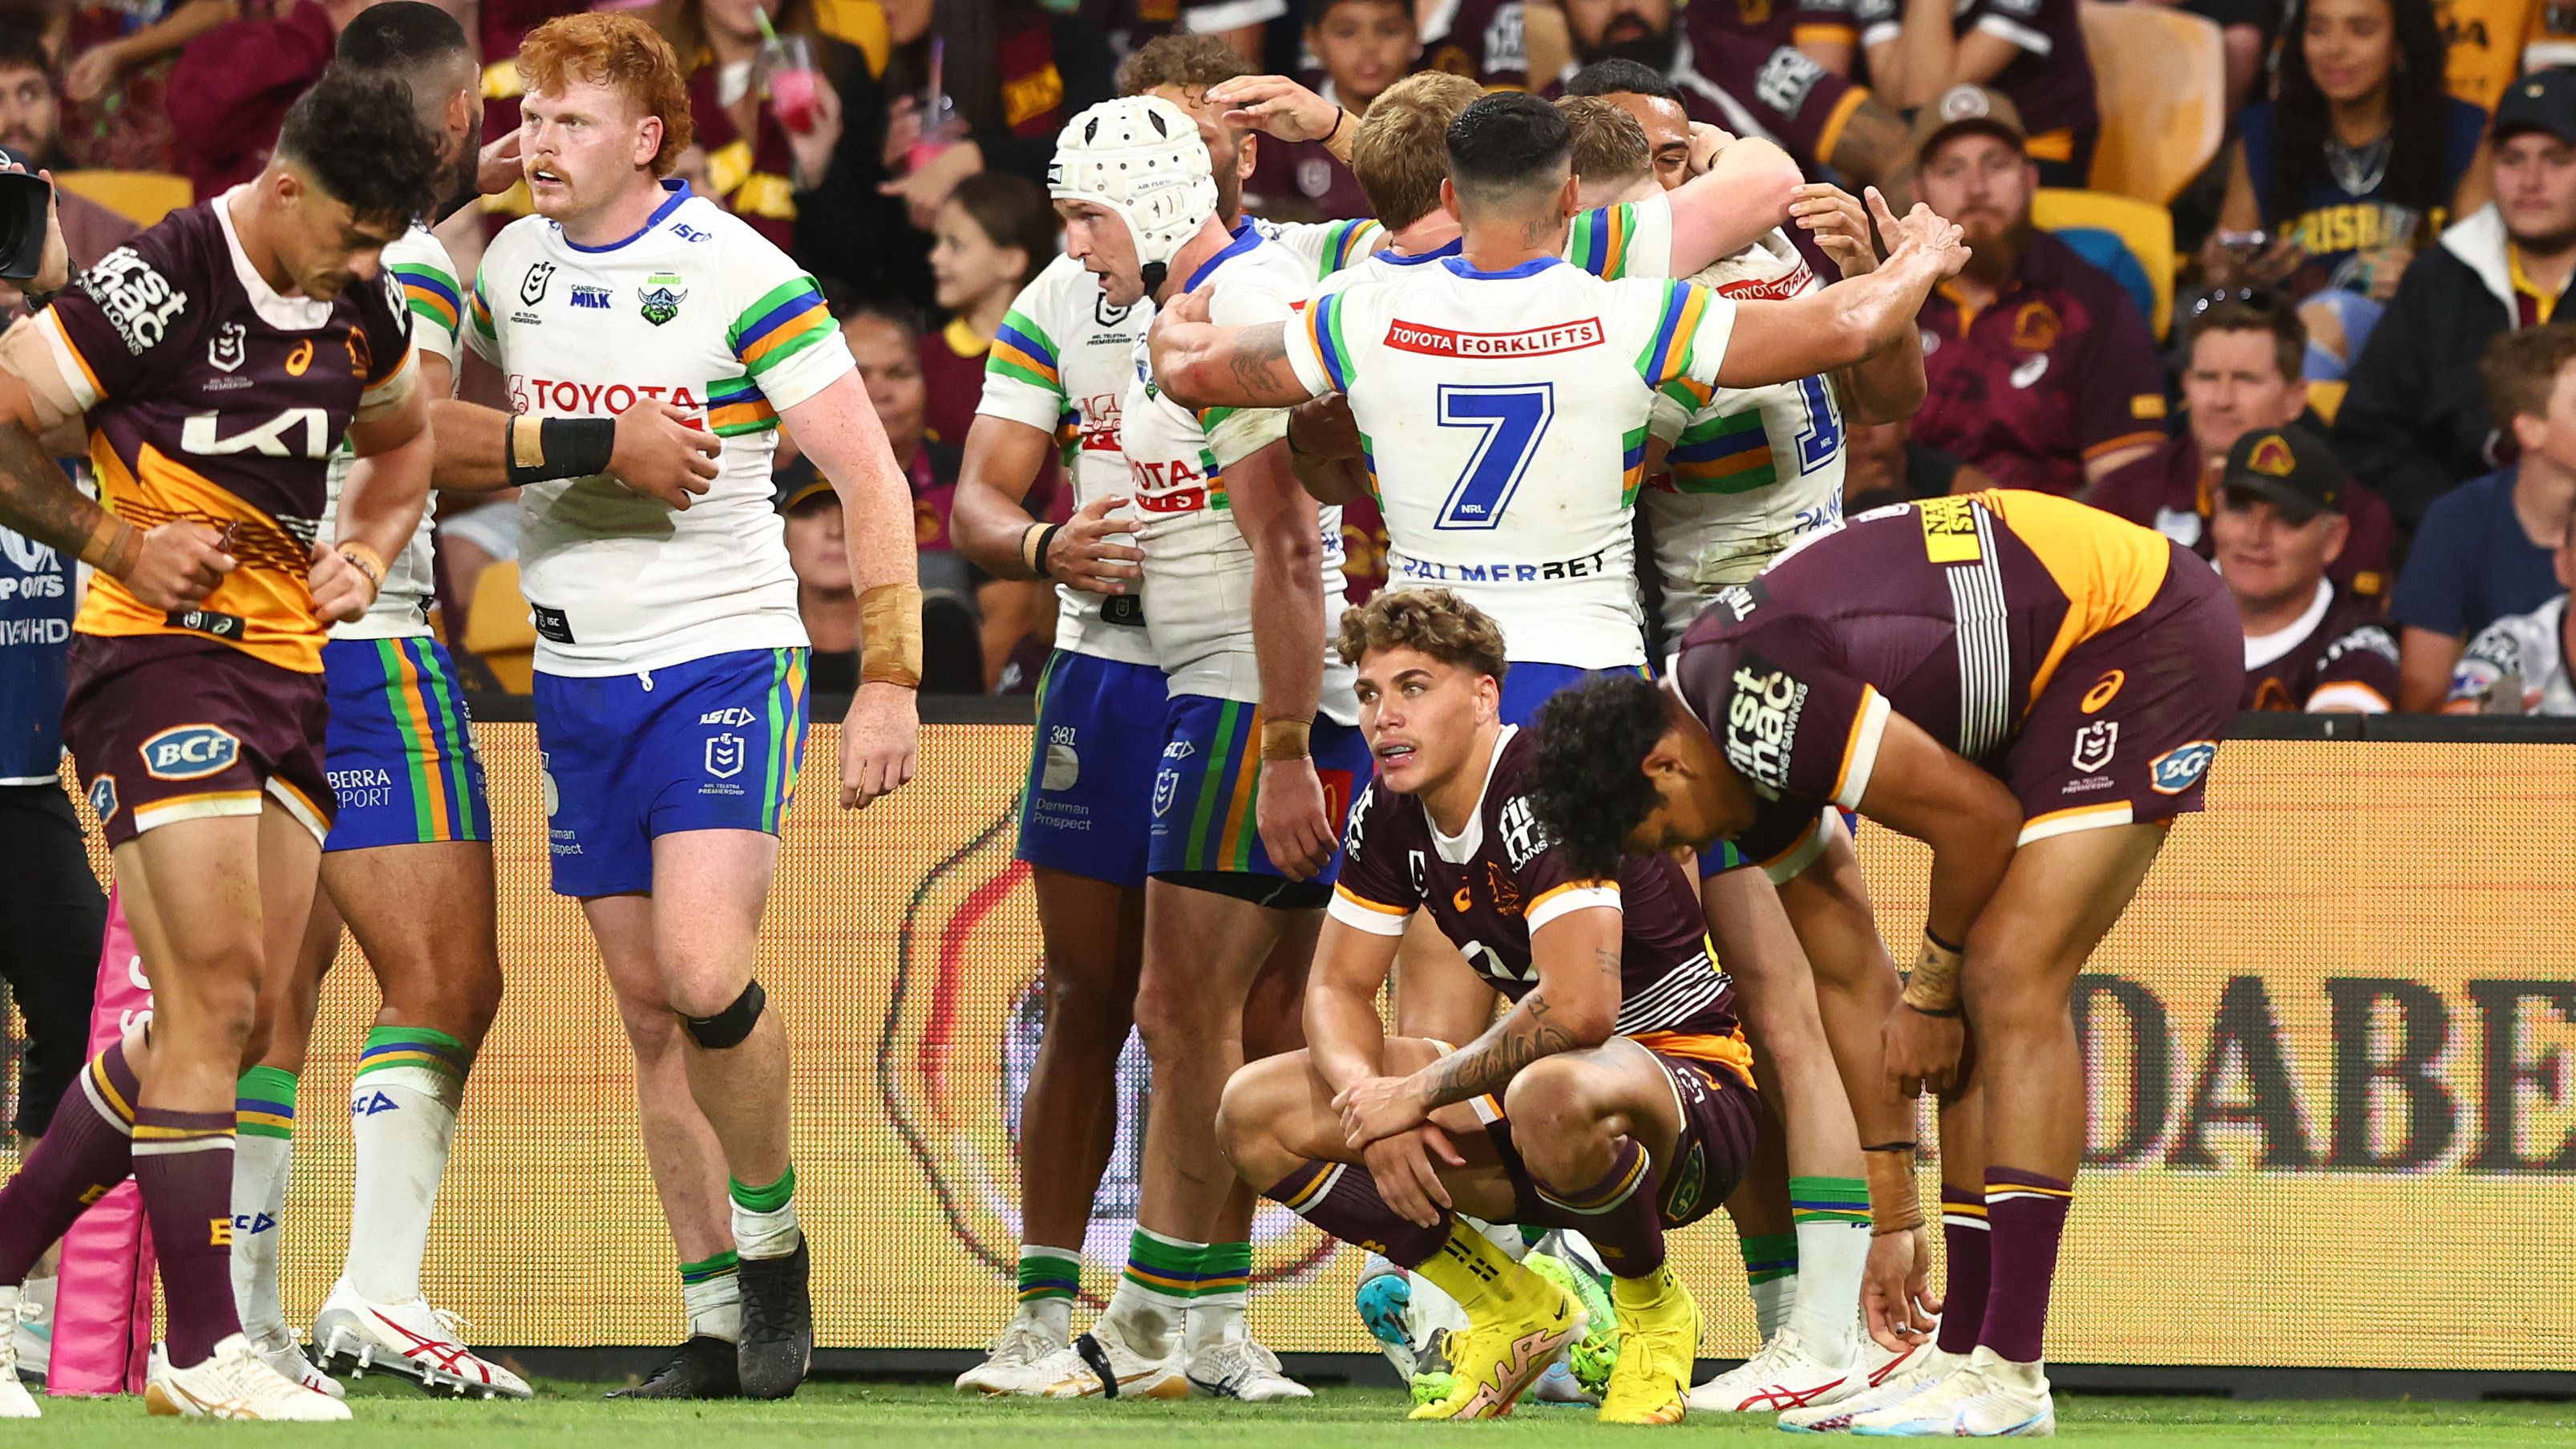 BRISBANE, AUSTRALIA - APRIL 08: Albert Hopoate of the Raiders scores a try during the round six NRL match between Brisbane Broncos and Canberra Raiders at Suncorp Stadium on April 08, 2023 in Brisbane, Australia. (Photo by Chris Hyde/Getty Images)